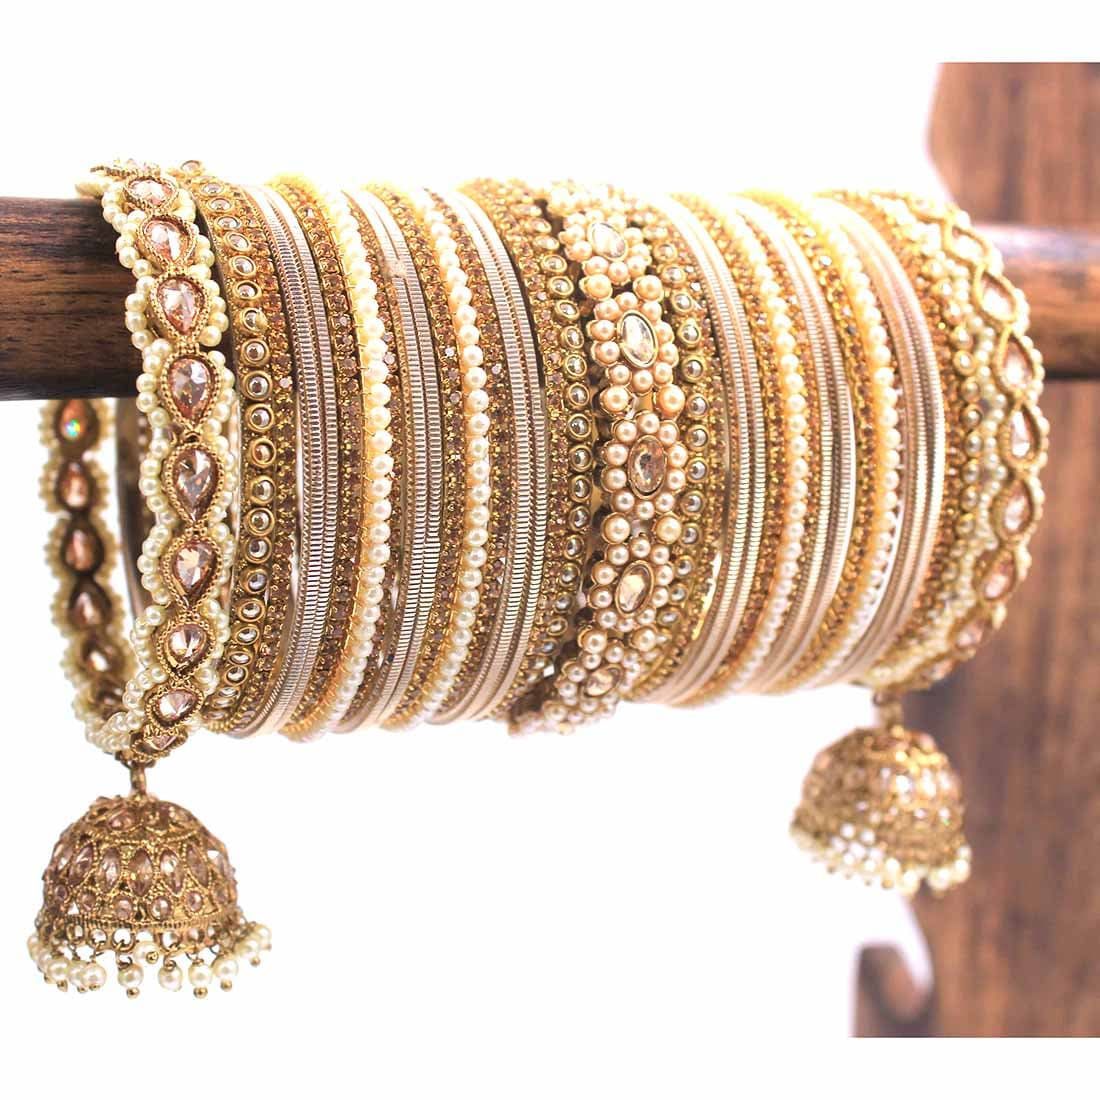 Bangles For Wedding: Traditional and Ornate Accessories for Bridal Attire